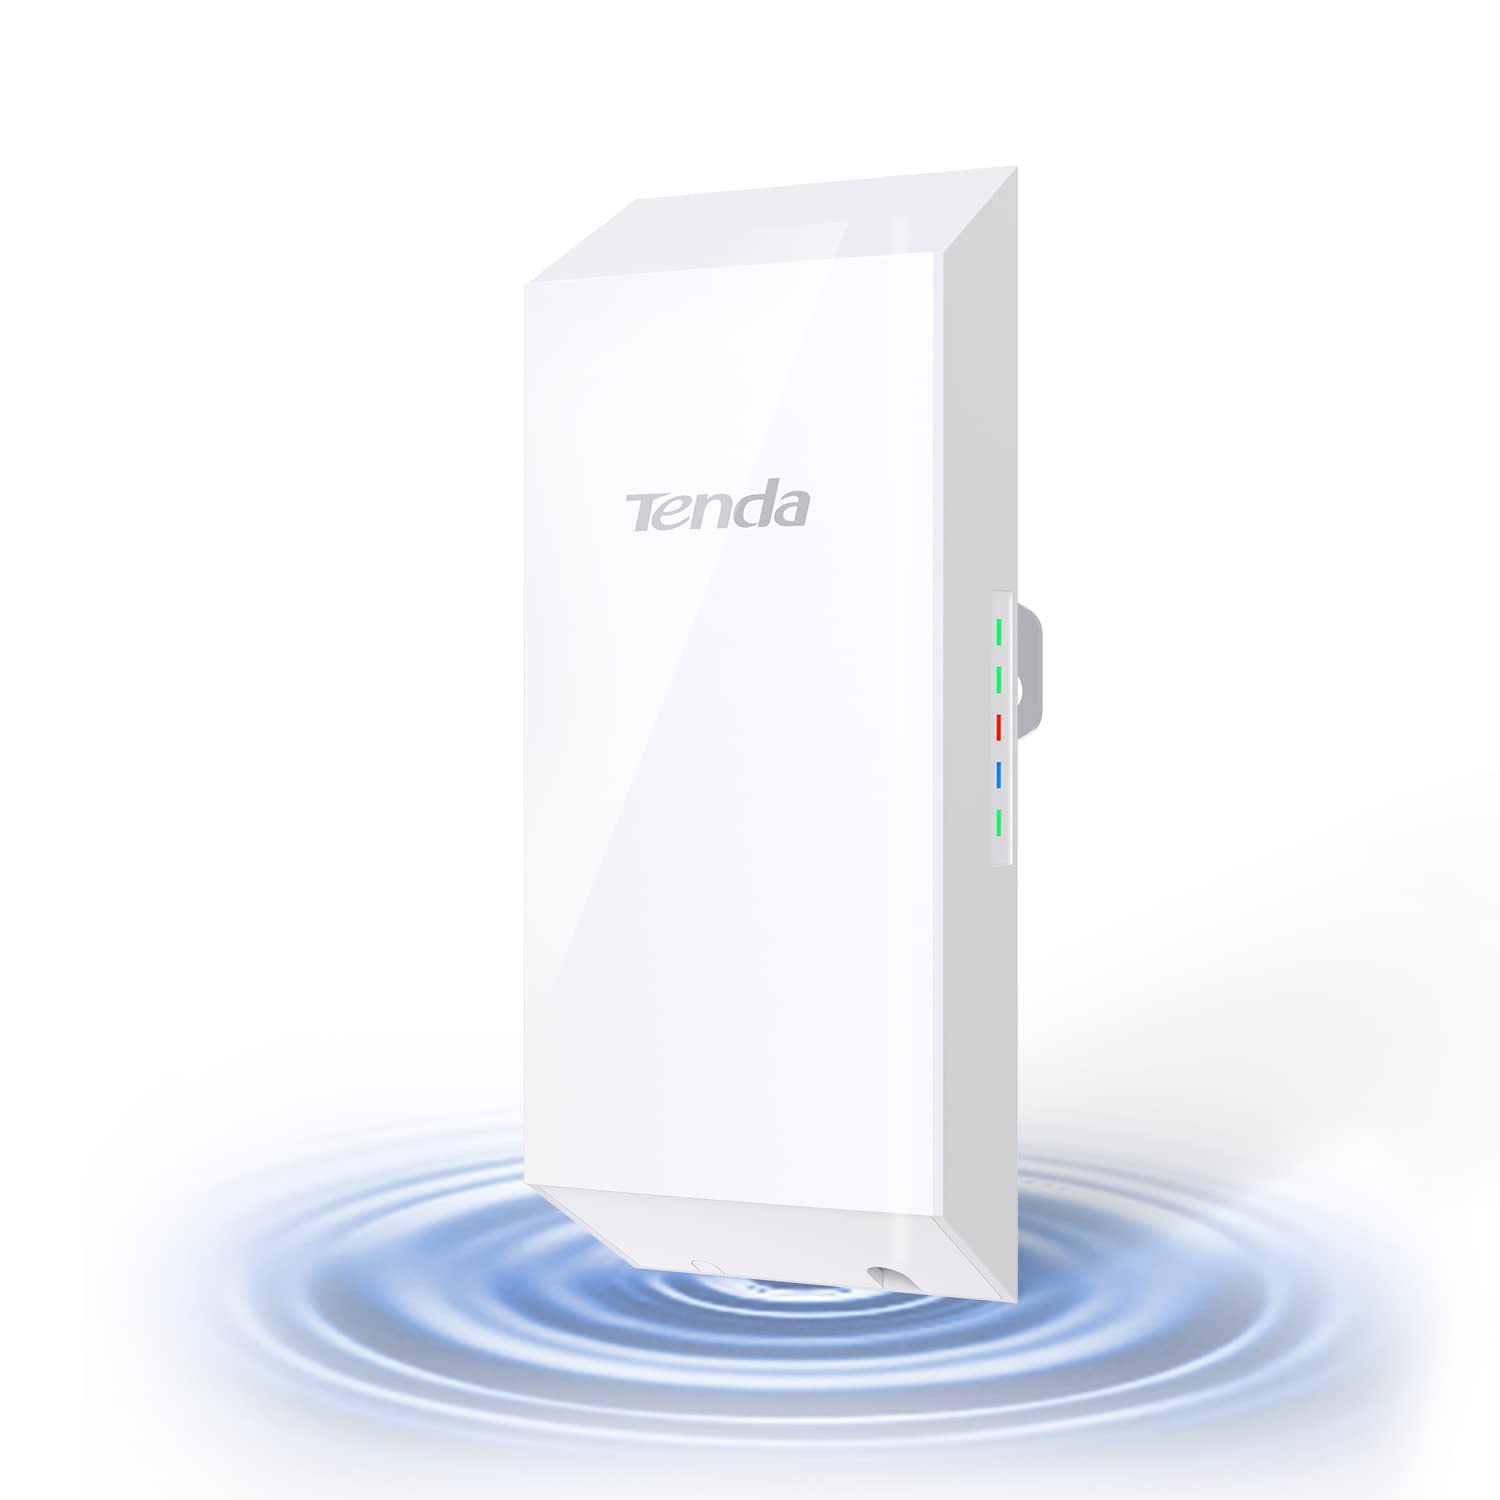 Tenda O1 Outdoor Access Point N300 Mbps, Long Range Smart Manage Outdoor CPE 2.4GHz, Wireless Bridge 8 dBi Transmission 500m, Passive PoE Powered, AP|Station|WISP|IP65 Waterproof Enclosure, O1(White)